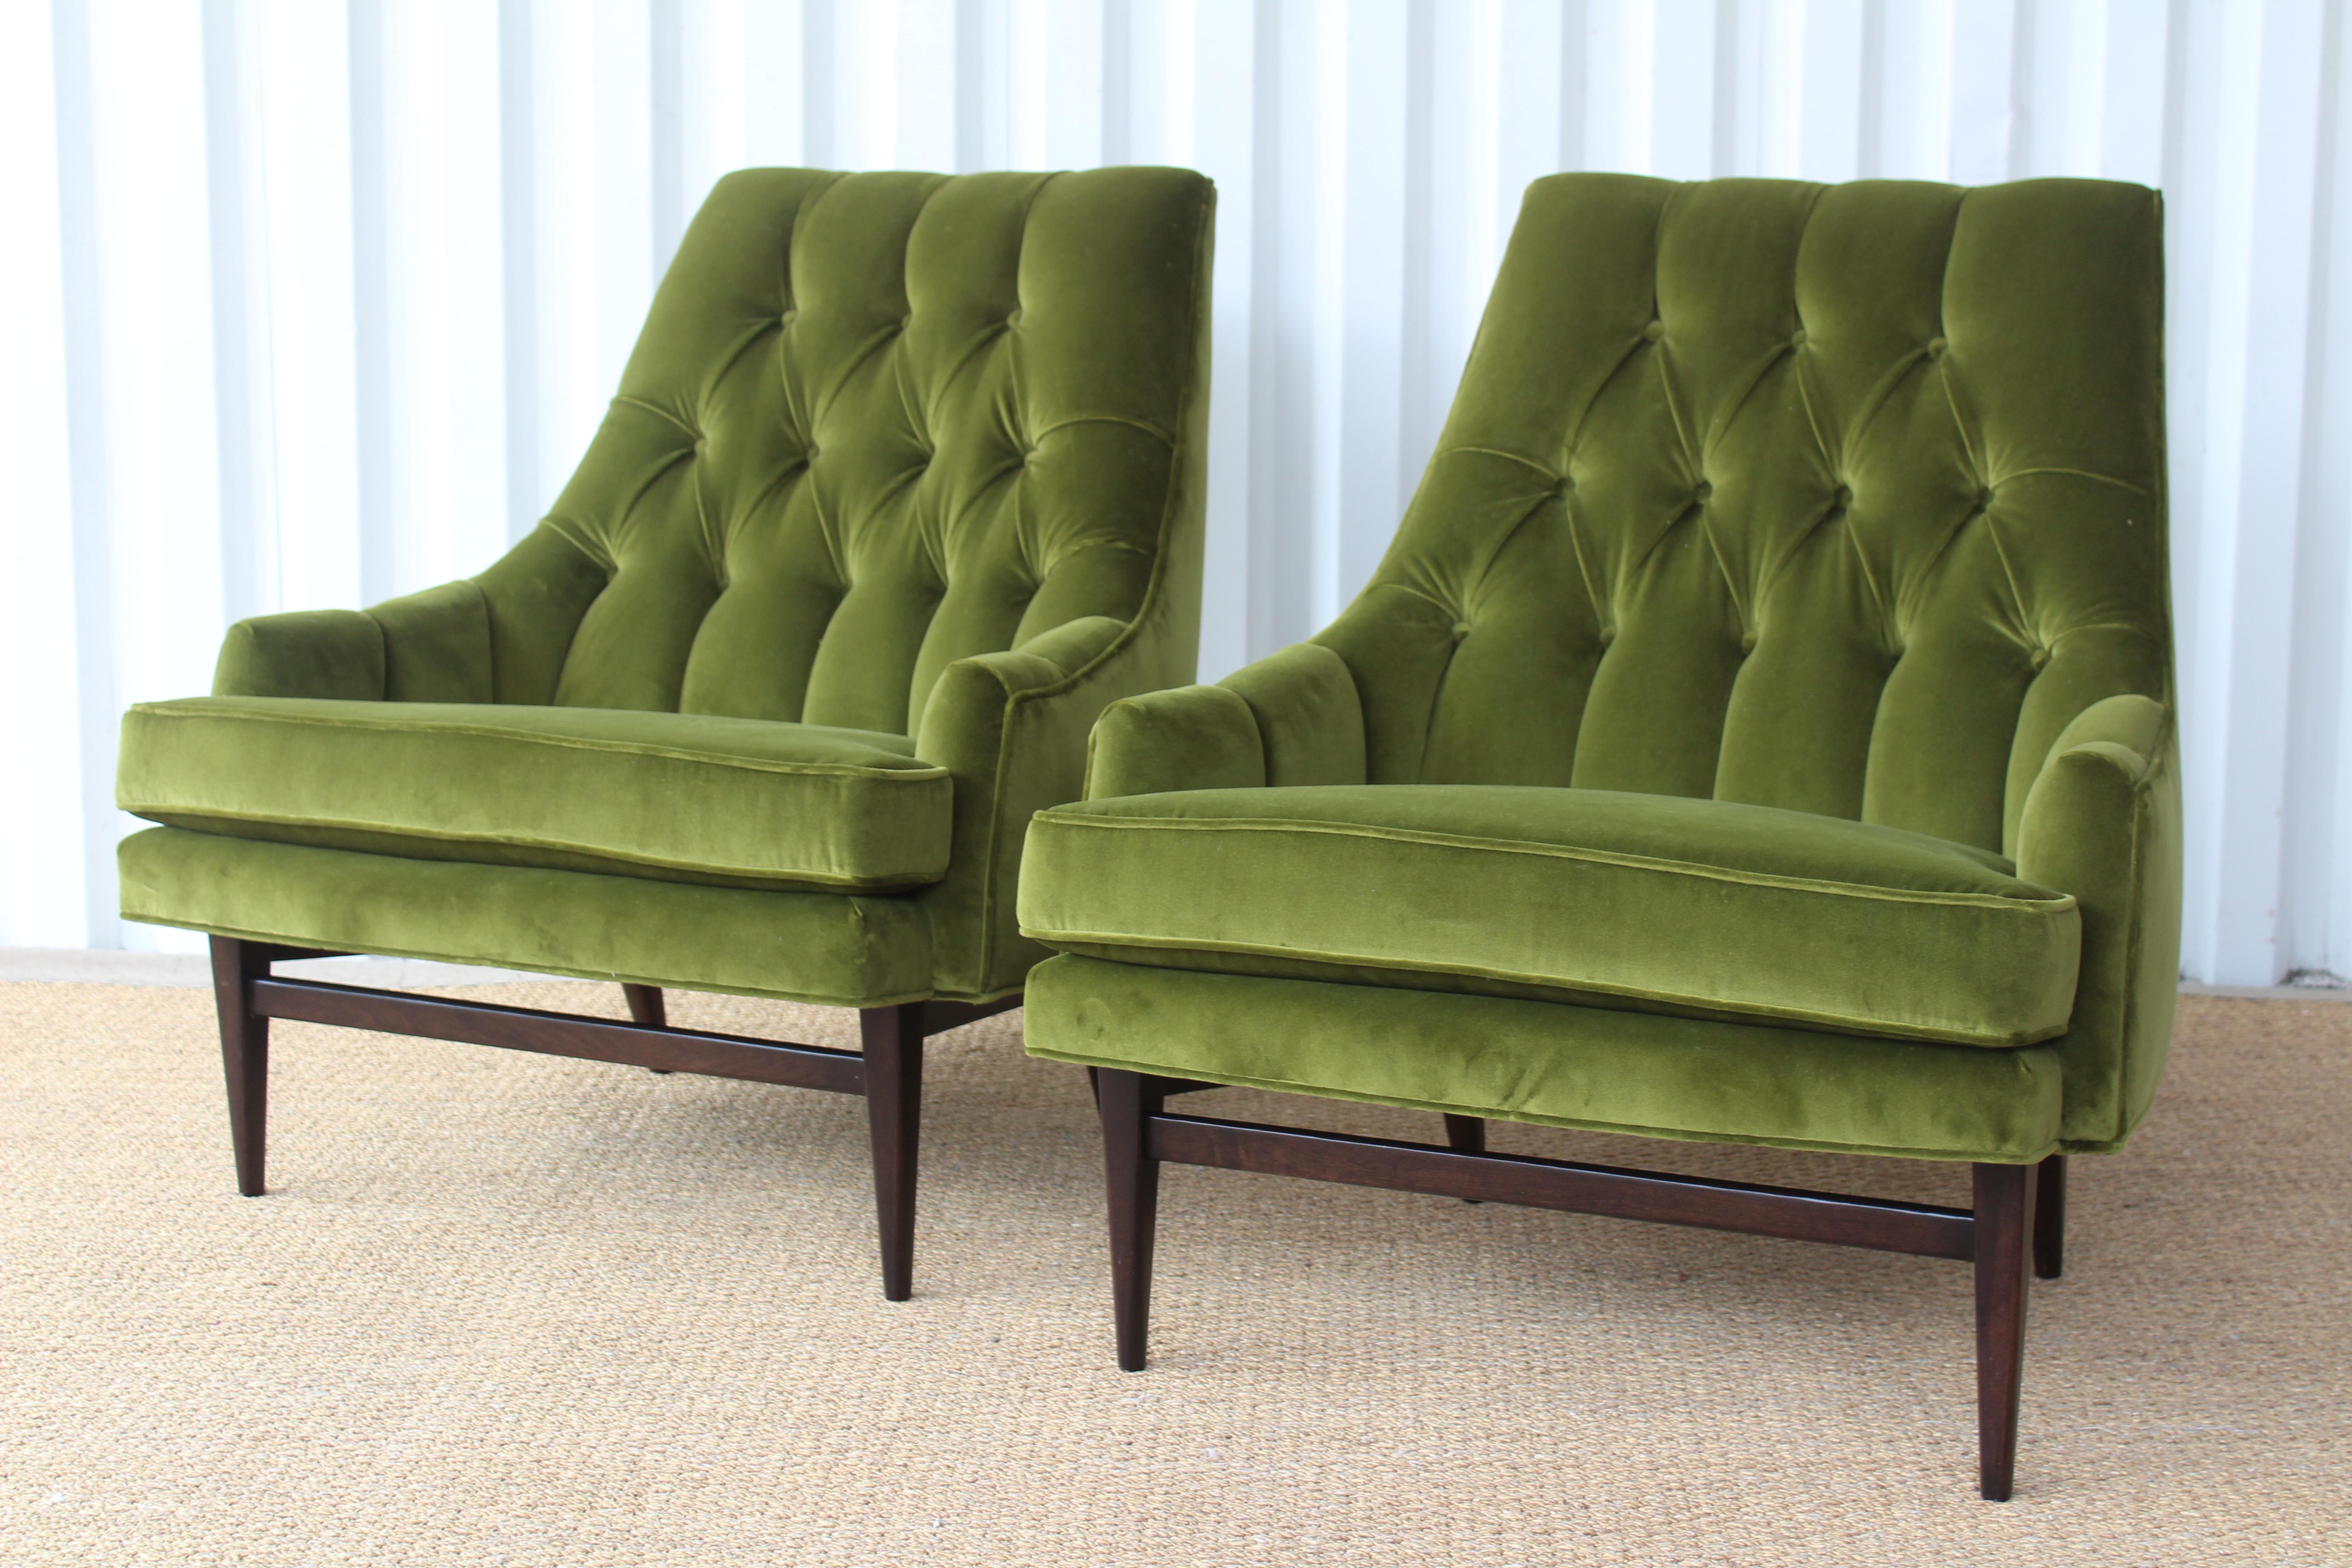 Pair of vintage 1960s tufted lounge chairs. Newly upholstered in an avocado green Italian velvet. The wood legs have been refinished in a dark walnut color. This velvet used is delicate and prone to crushing, due to the nature of the fabric you will